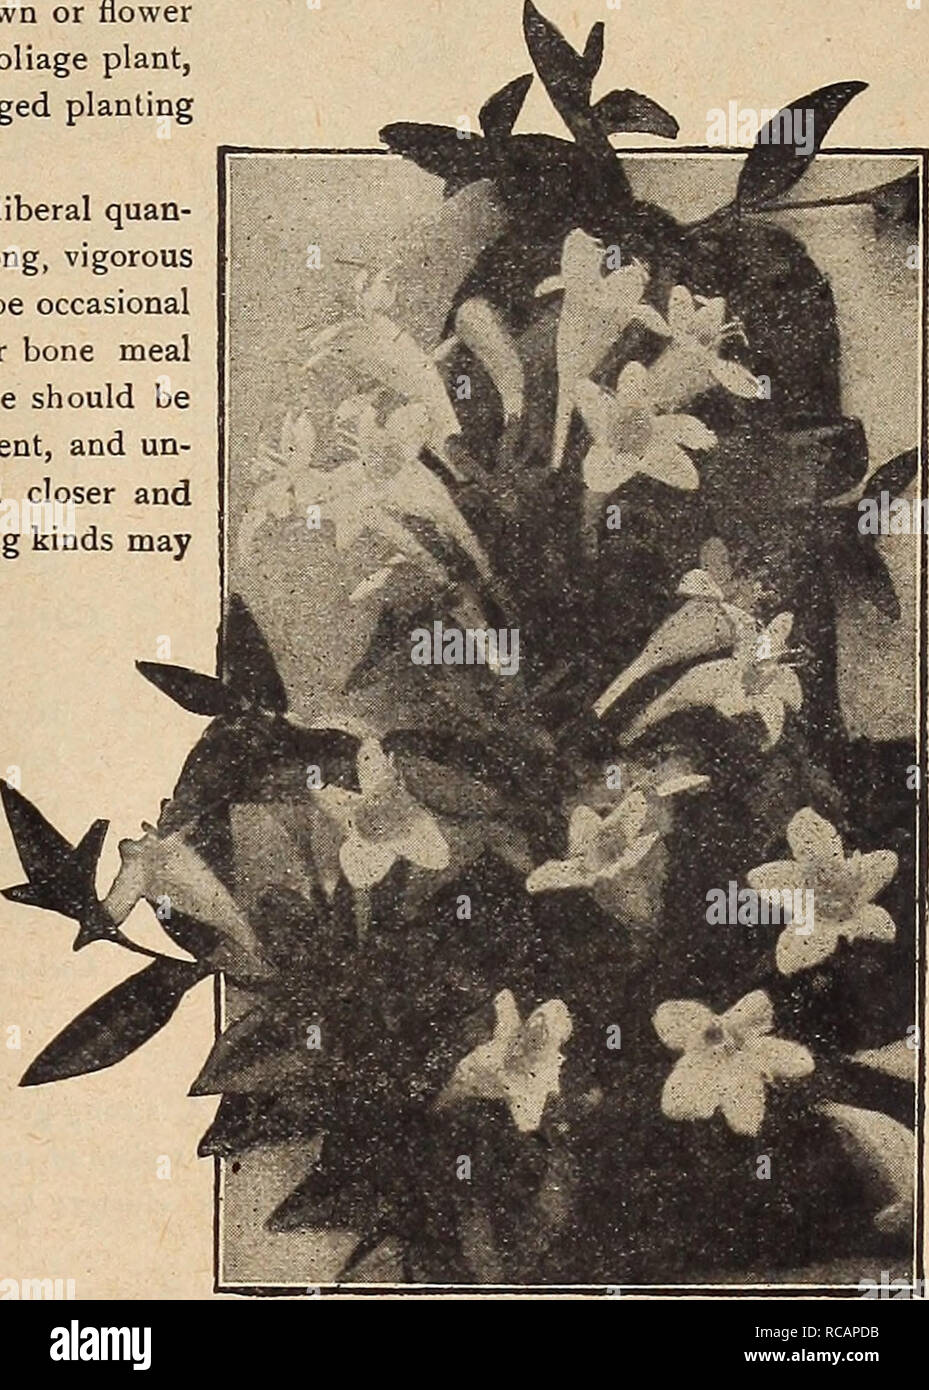 . Dreer's autumn catalogue 1919. Bulbs (Plants) Catalogs; Flowers Seeds Catalogs; Gardening Equipment and supplies Catalogs; Nurseries (Horticulture) Catalogs; Vegetables Seeds Catalogs. Althea William R. Smith Abelia Chinensis Grandiflora ISew Giant-flowered Altbea l^II^I^IAM R, SMITH Everyone will be pleased with this splendid new variety; one of our own introductions. The habit of the plant is ideal, naturally forming attractive, symmetrical, bushy specimens, while the glistening pur^ white flowers are of giant size com- pared to all other sorts, being fully 4 inches in diam- eter under ord Stock Photo